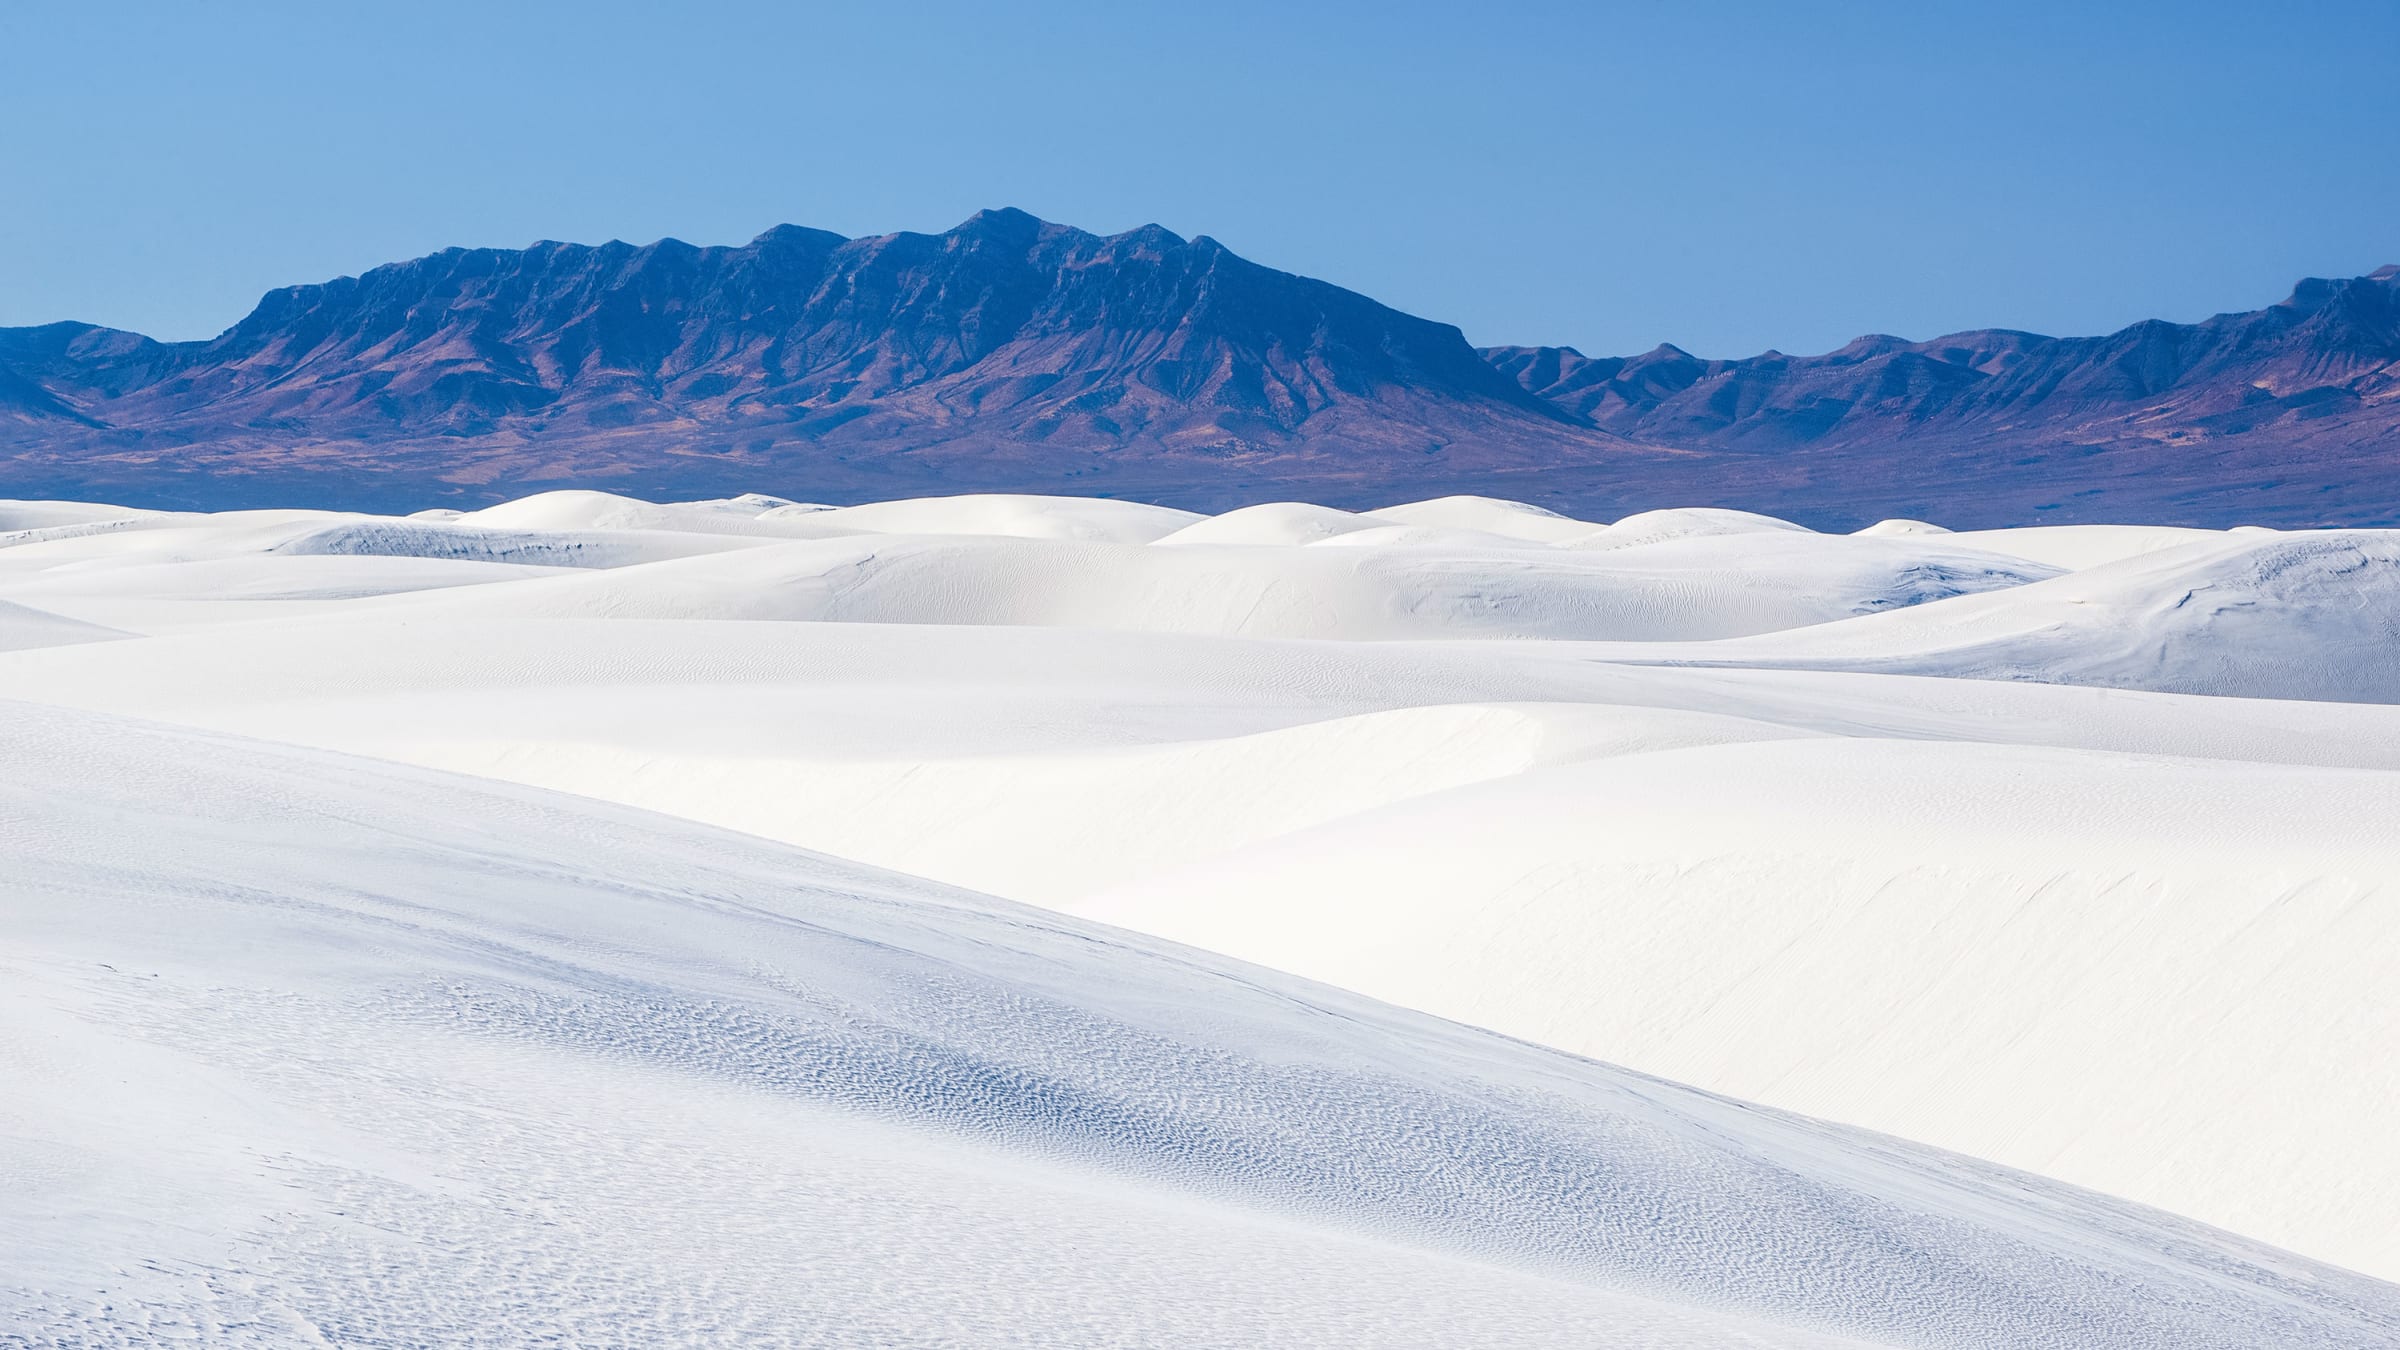 White Sands National Monument Brad Pitt Inspired Me to Camp Here for My Birthday Sex Pic Hd